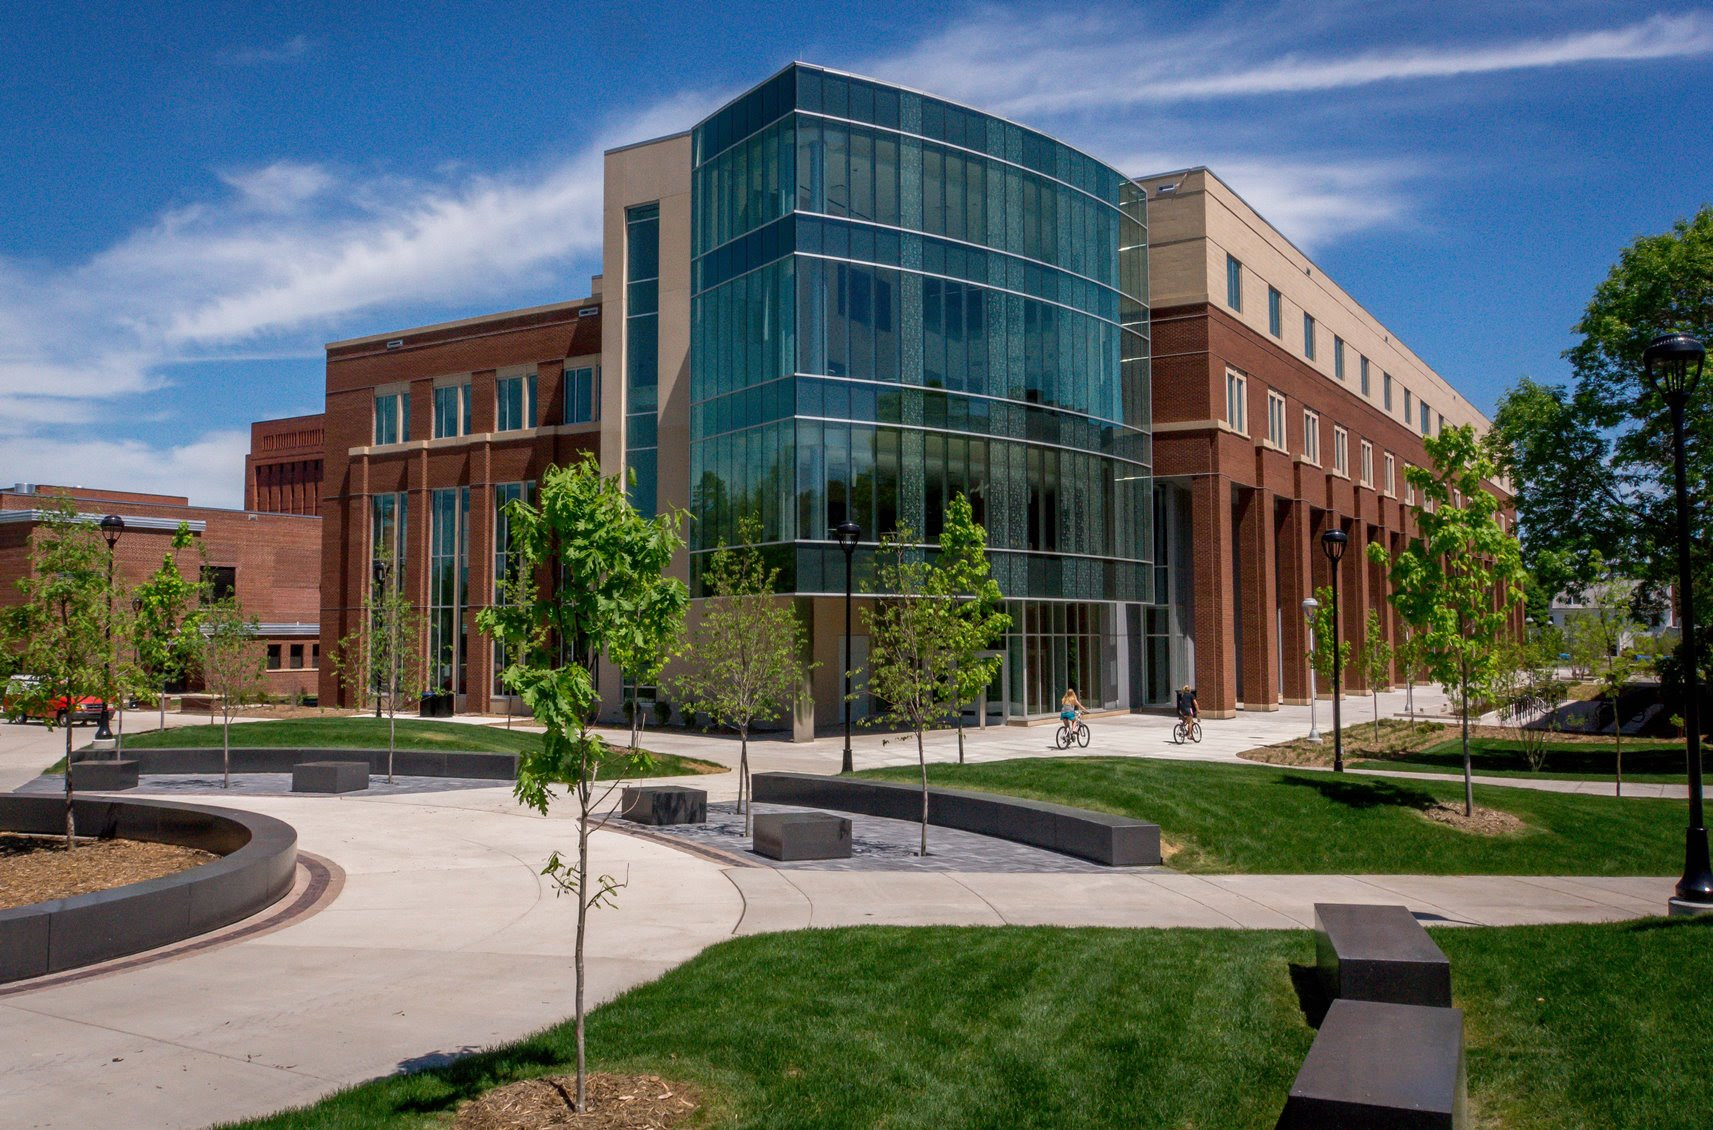 Centennial Hall is the first new academic building on the UW-Eau Claire campus i